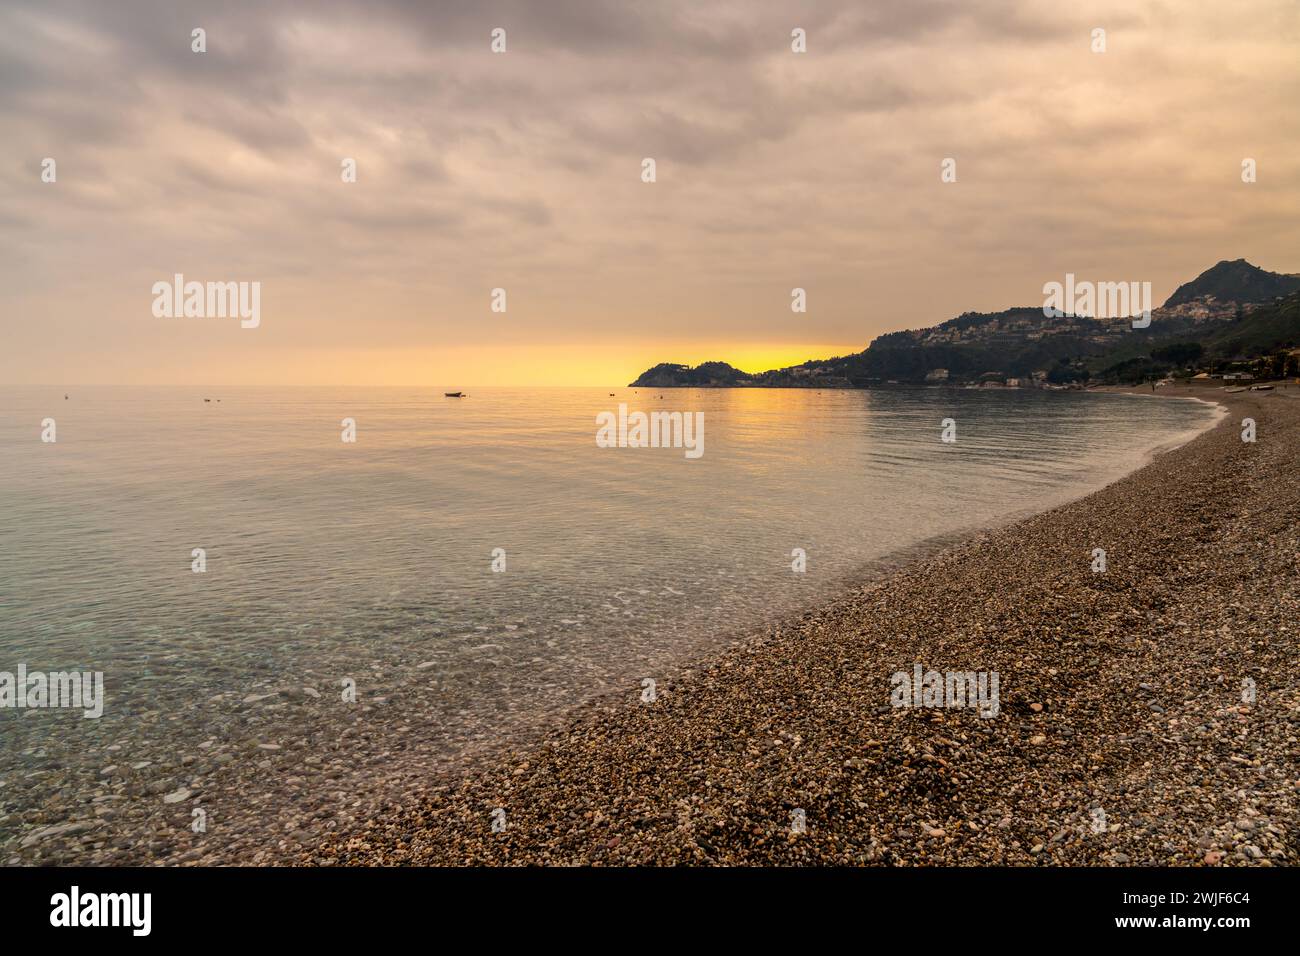 A view of the stone pebble beach and clear water at Letojanni on Sicily at sunsest Stock Photo